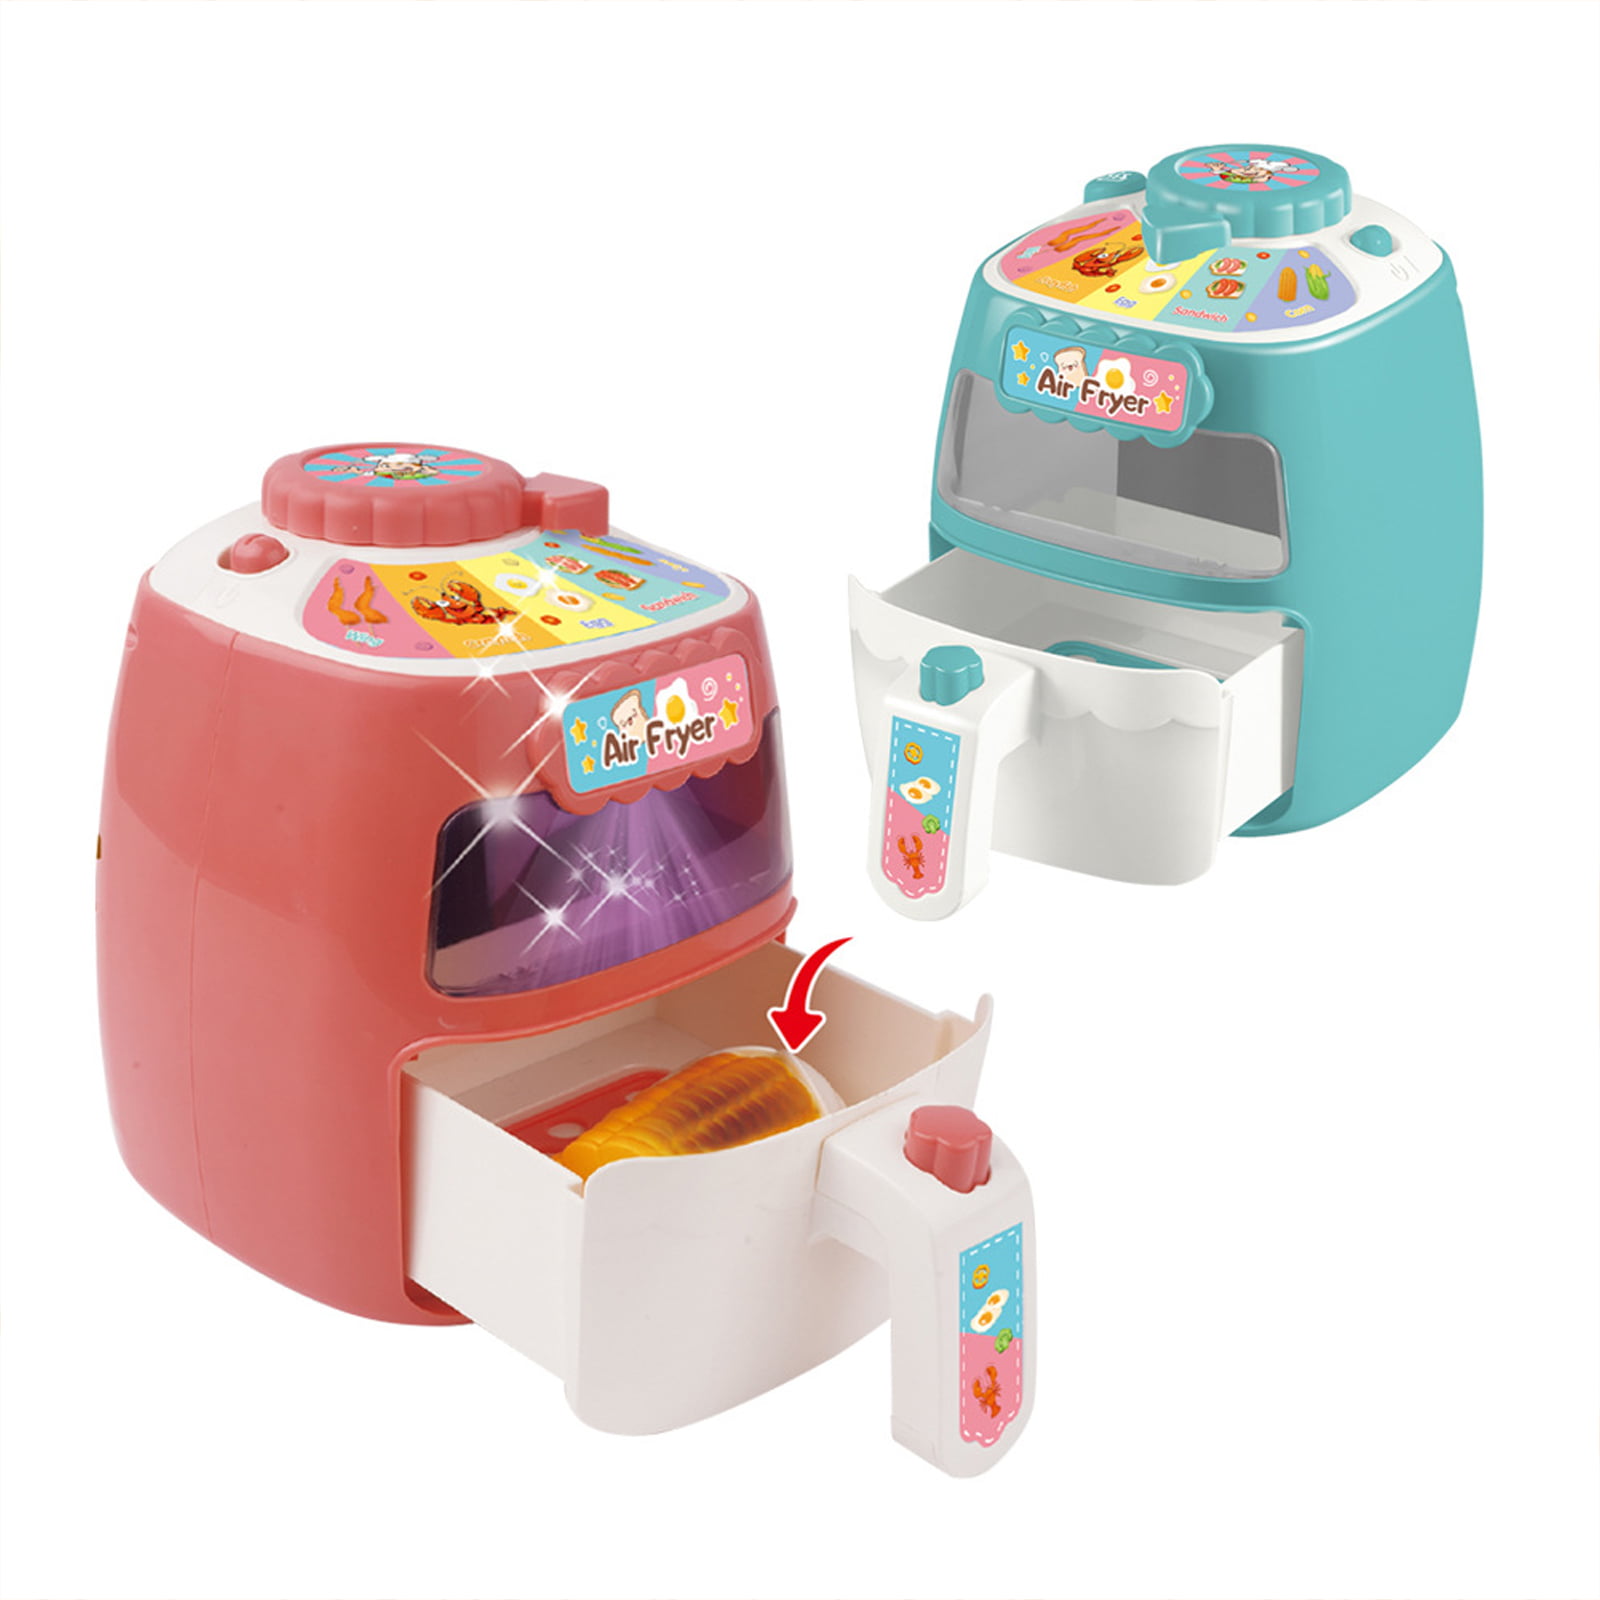  Toy Air Fryer, Play Kitchen Accessories Set for